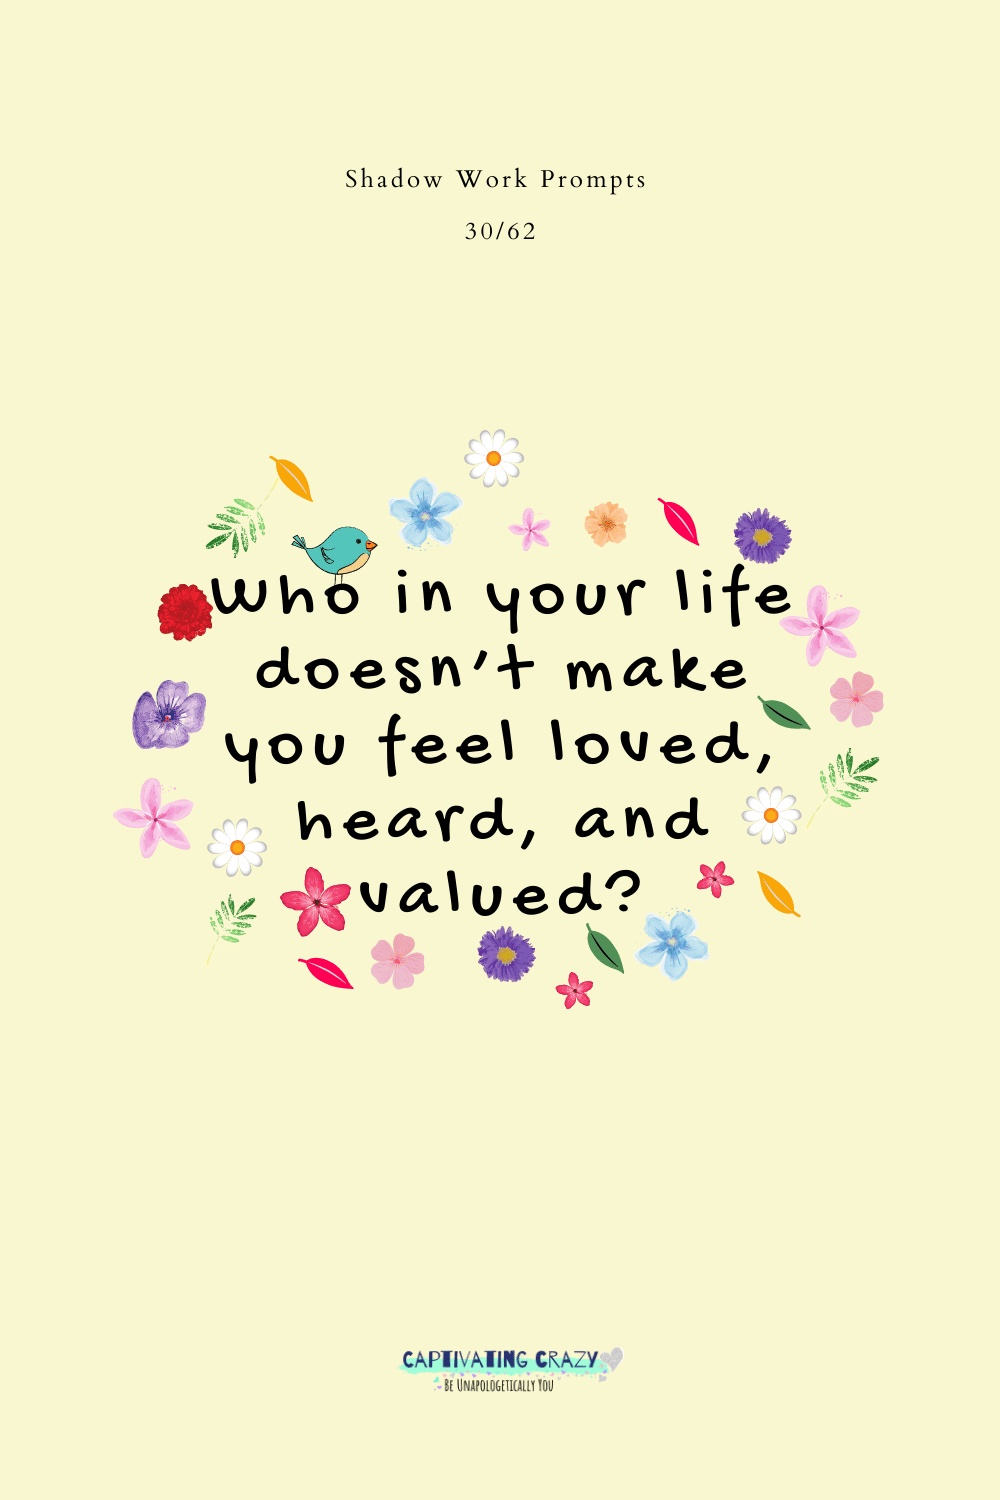 Who in your life doesn't make you feel loved, heard, and valued?